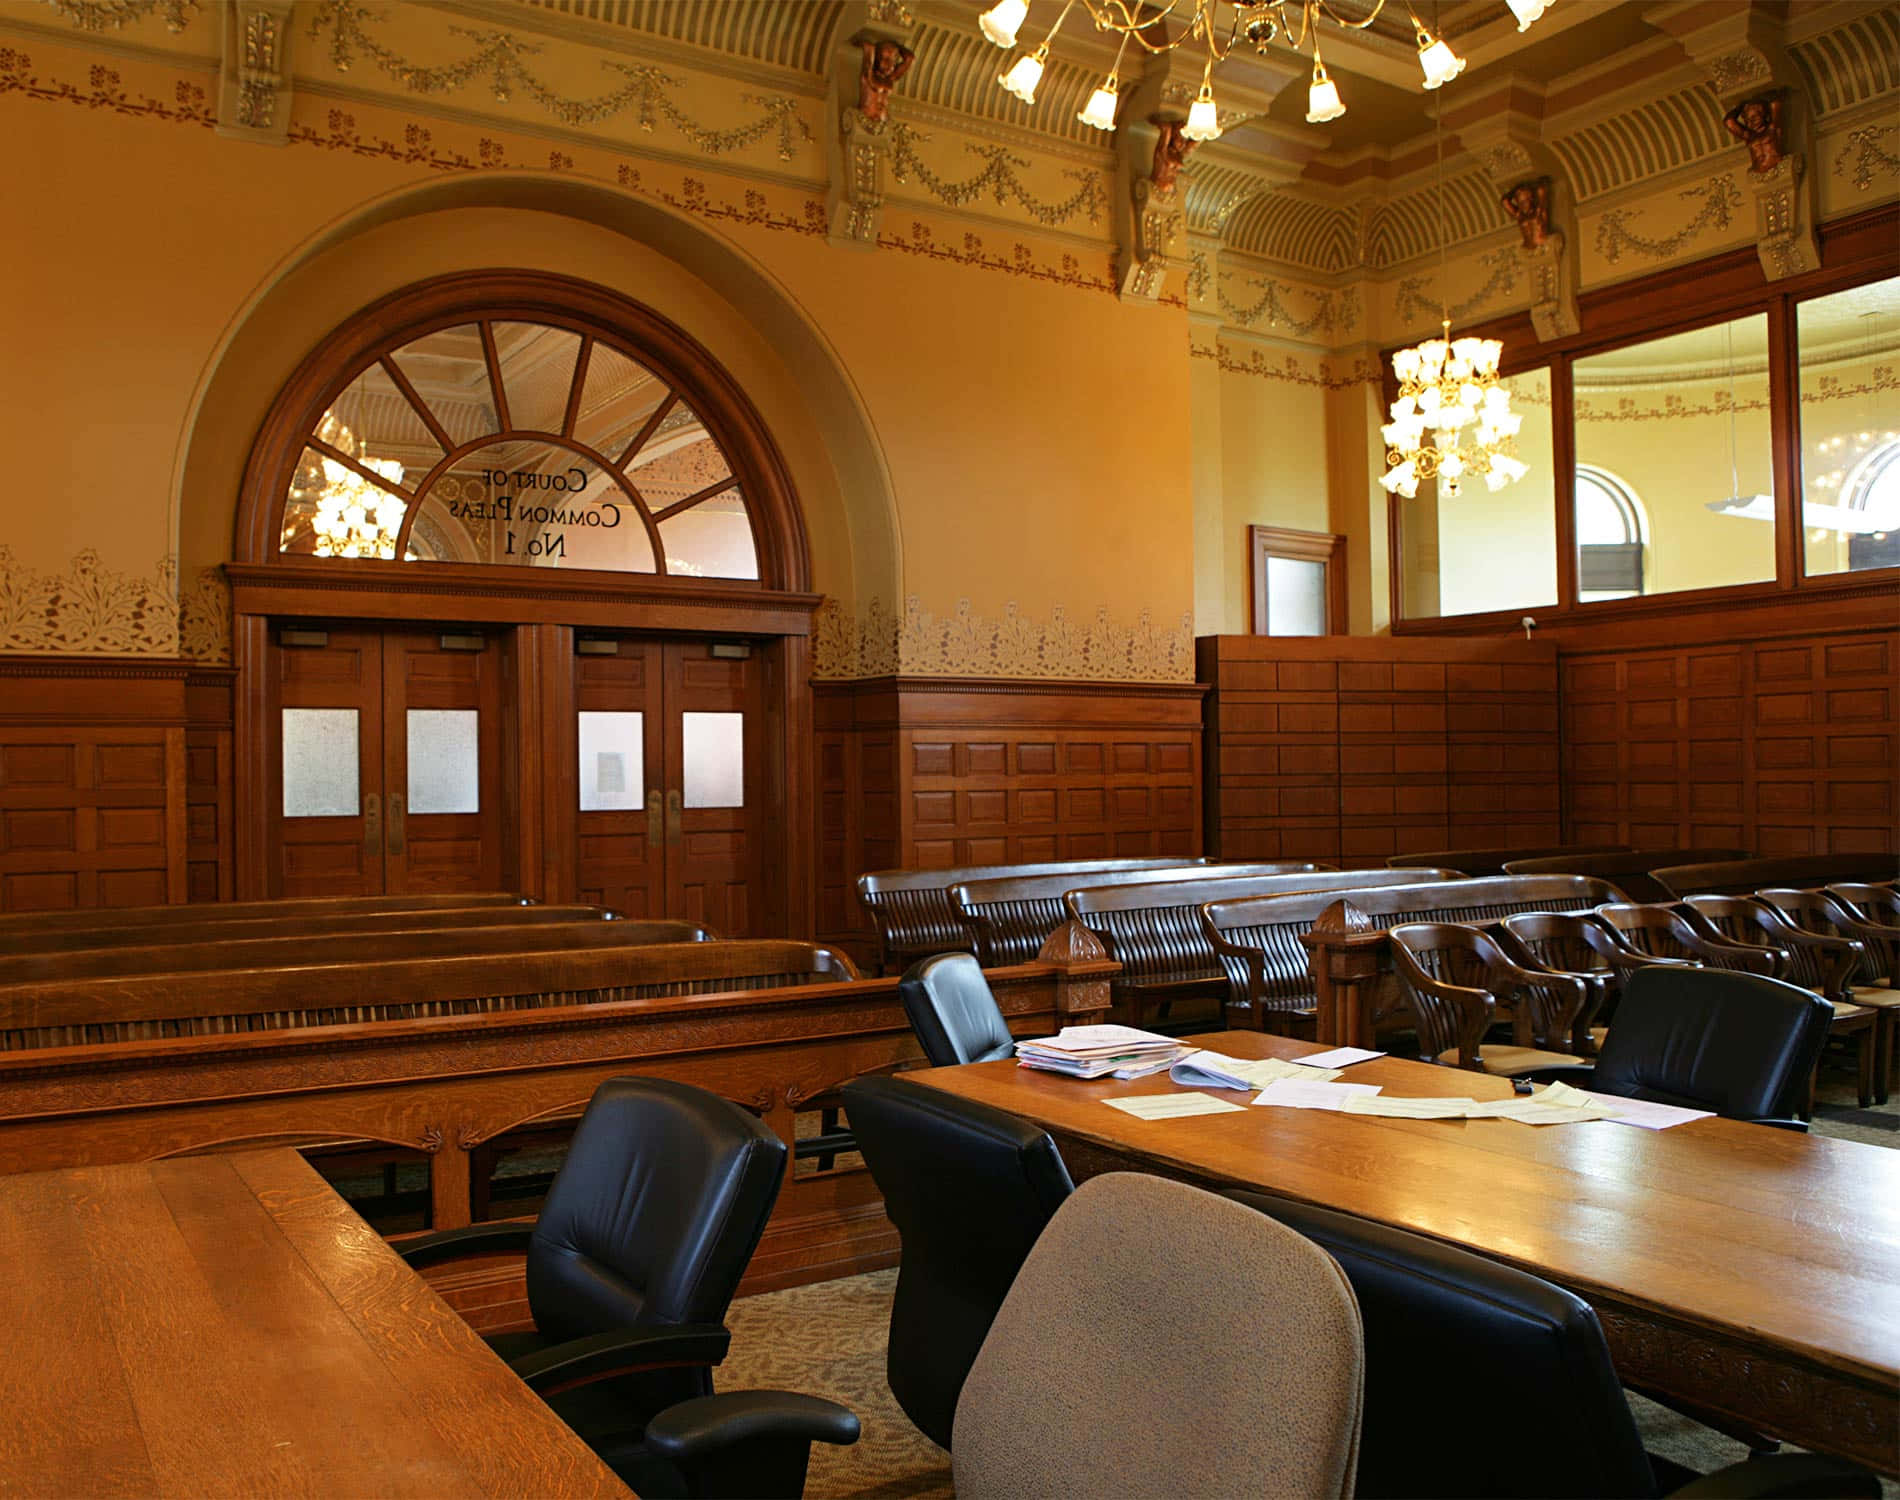 Wooden Tables In Courtroom Background